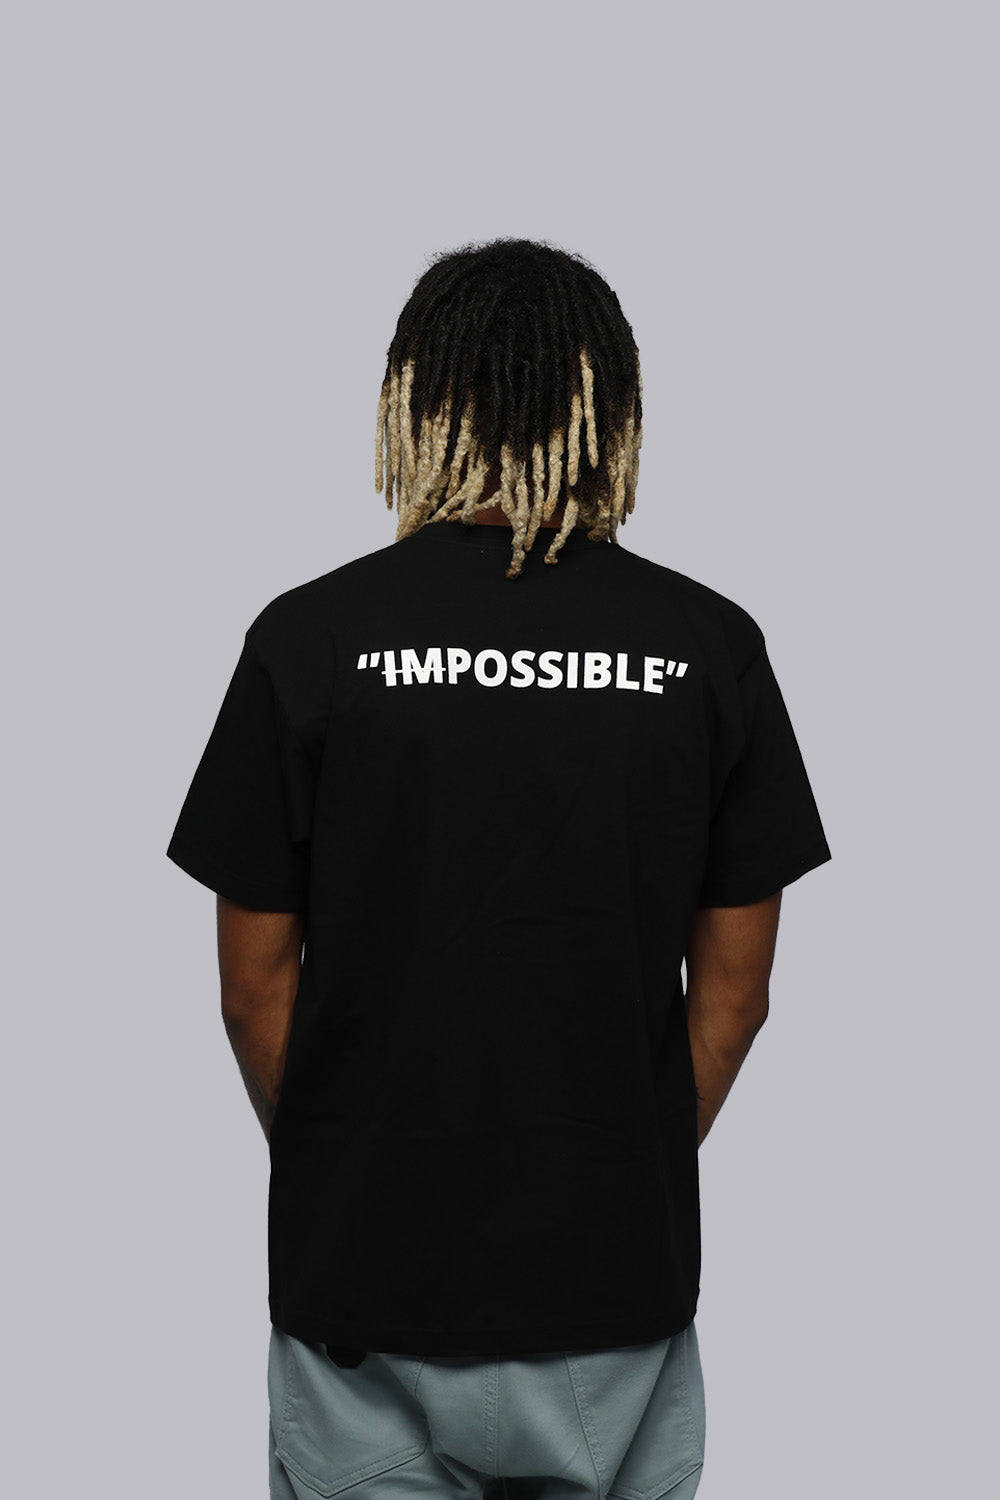 "IMPOSSIBLE"